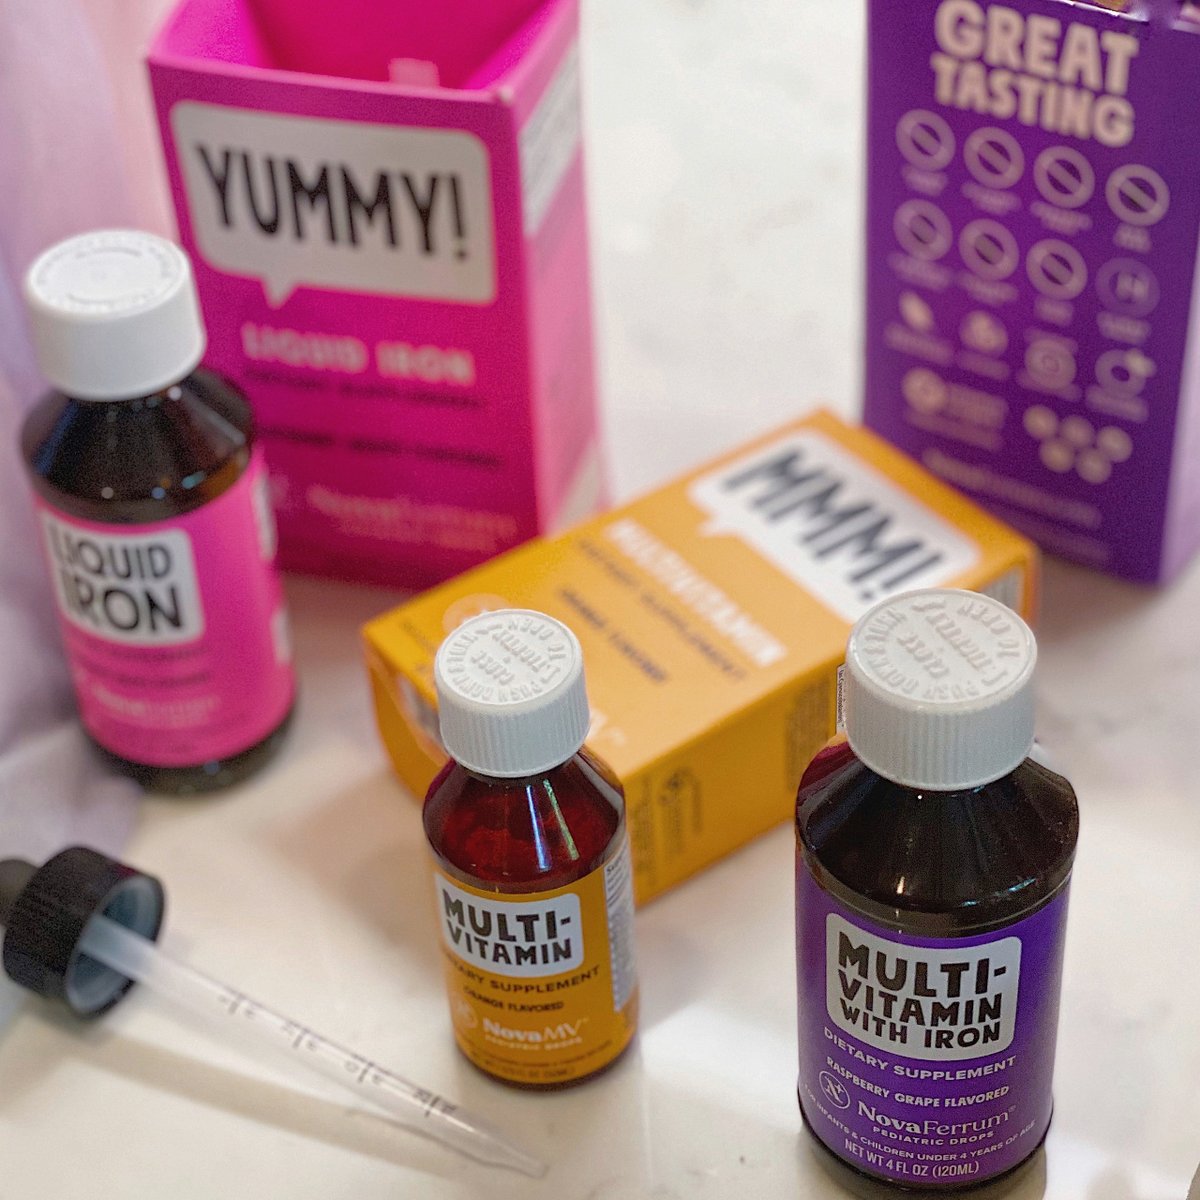 Mornings are easier with yummy NovaFerrum! ⁣
Our allergy friendly vitamins are clinically proven to be effective and are sweetened ⁣
with all natural monk fruit and all natural raspberry grape flavors 💖 ⁣
⁣
#sugarfreevitamins #busymoms #sahmlife #healthyfamily #momsknow